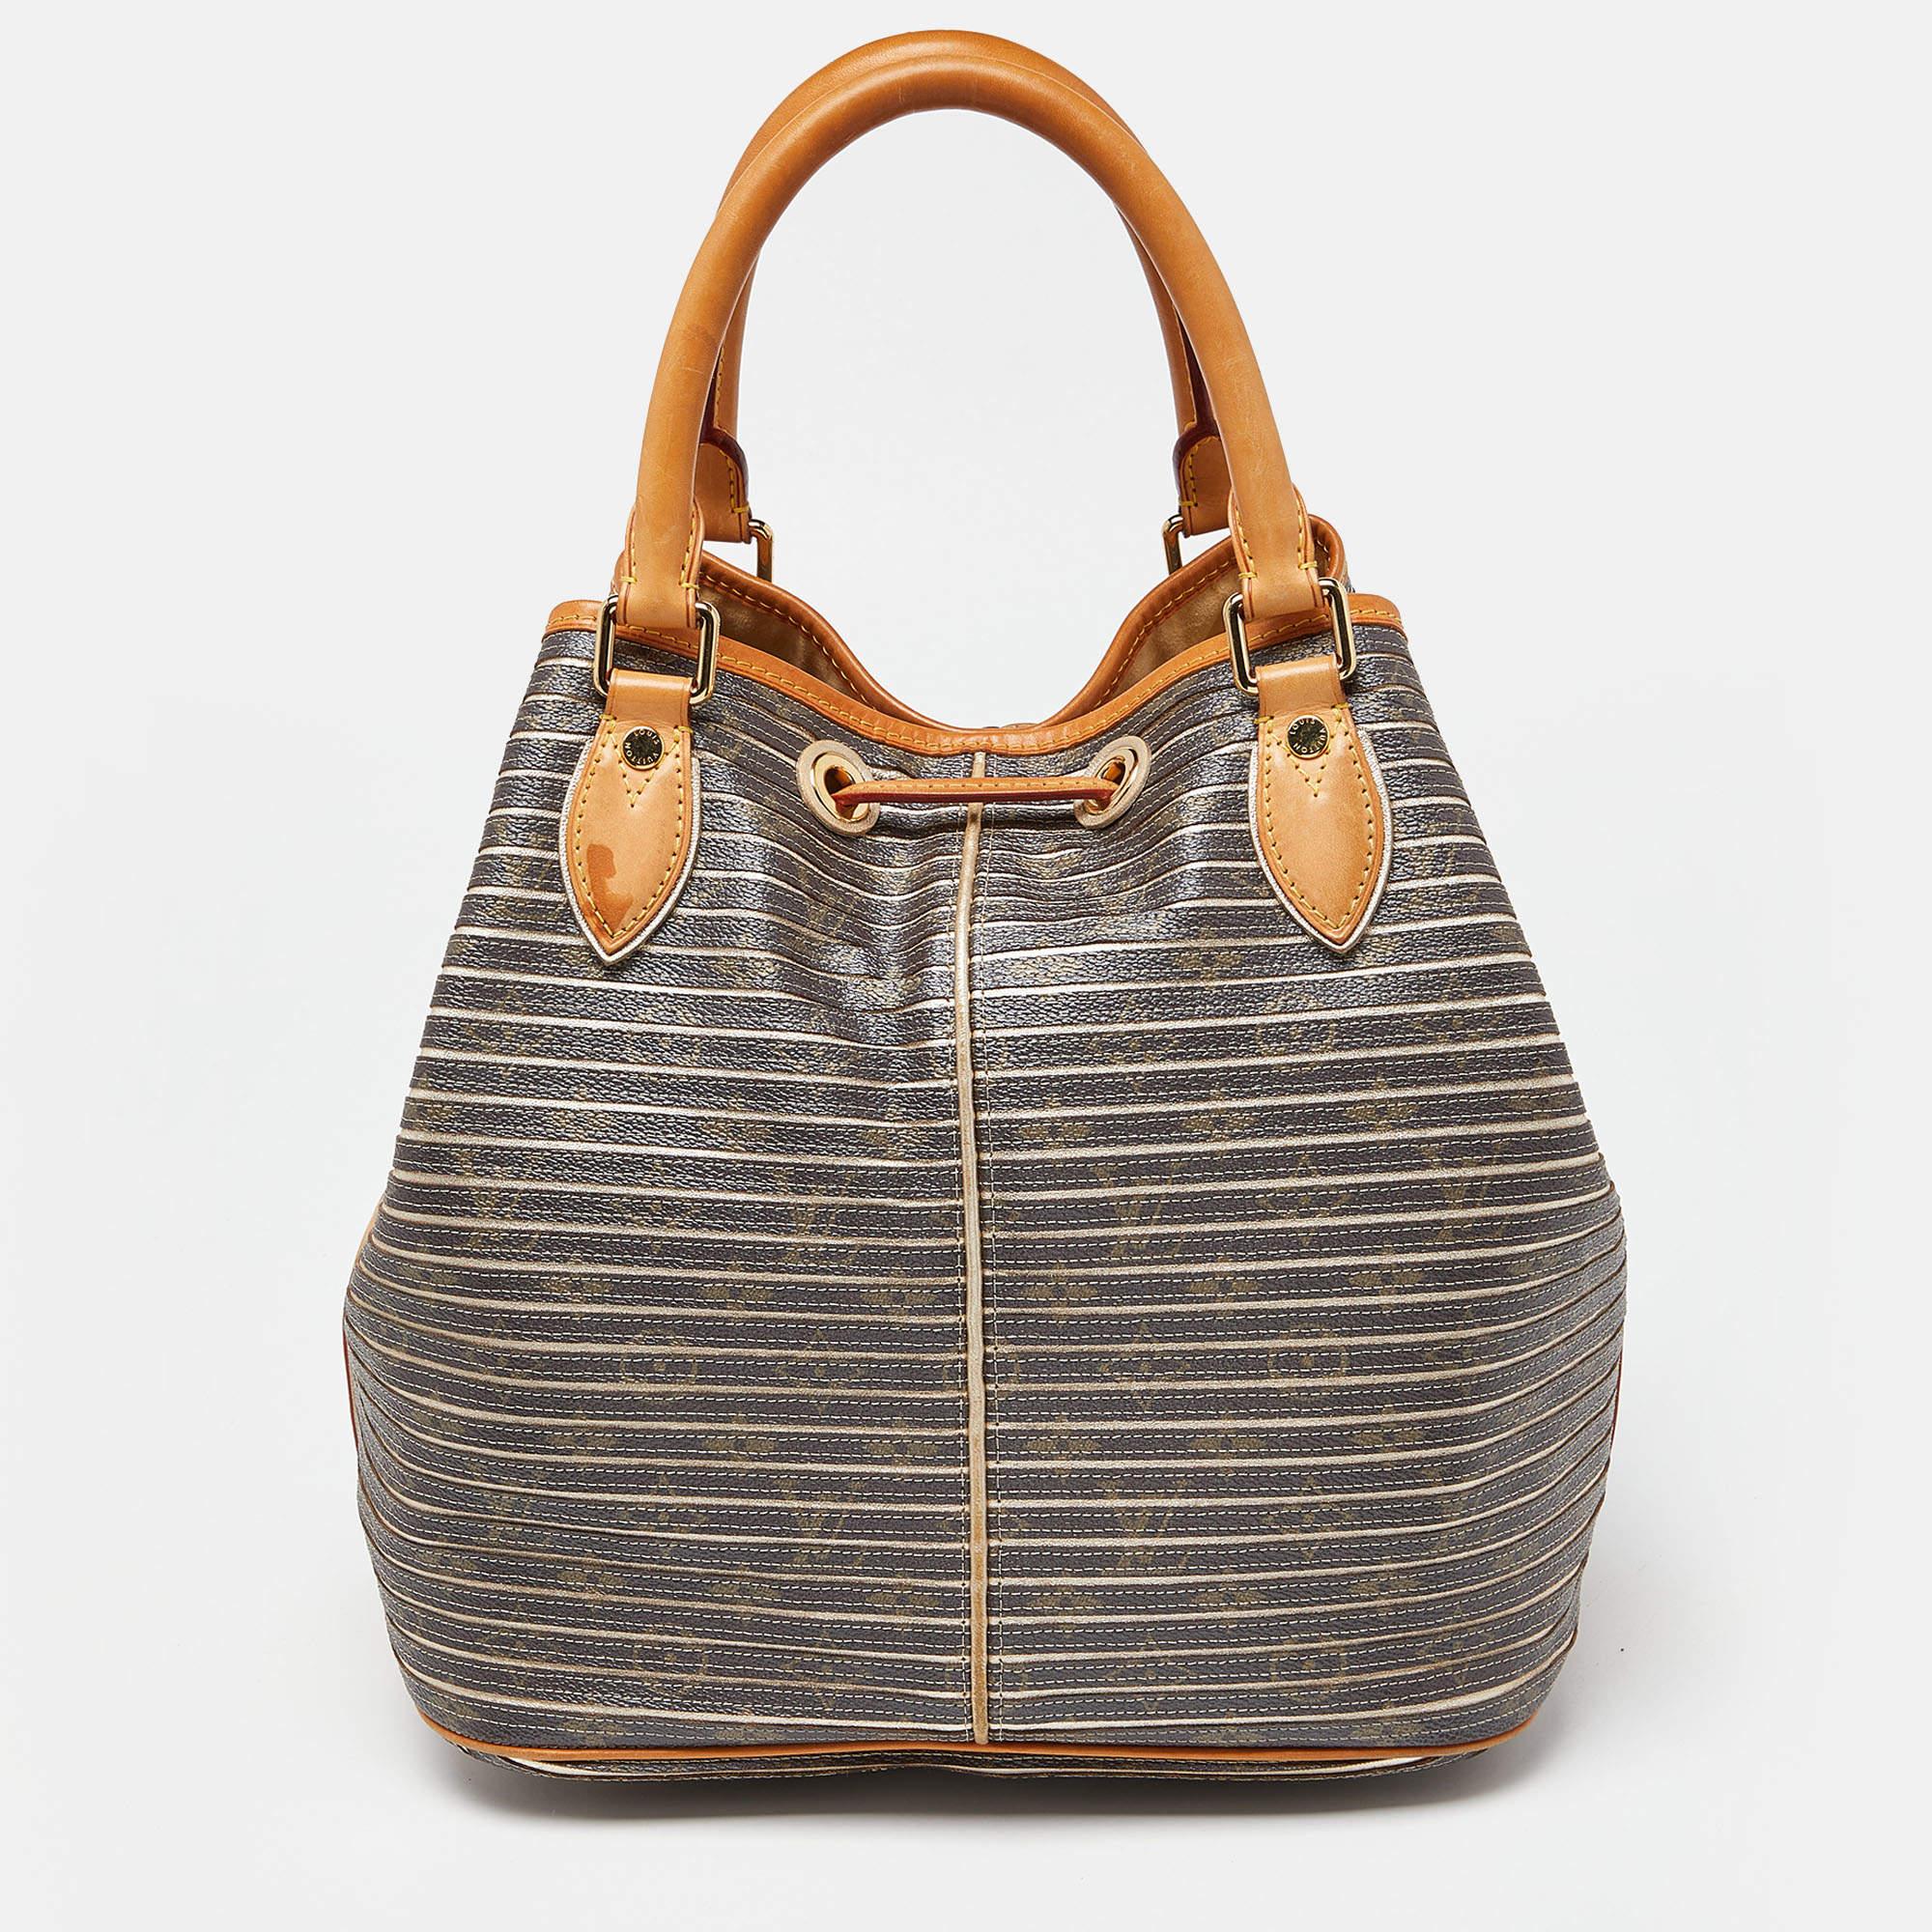 Radiate with classic style when you swing this Limited Edition Eden Neo bag from Louis Vuitton. Beautifully crafted from Argent monogram canvas, this piece is a beauty. The drawstring opens to a spacious Alcantara interior and the bag is held by two